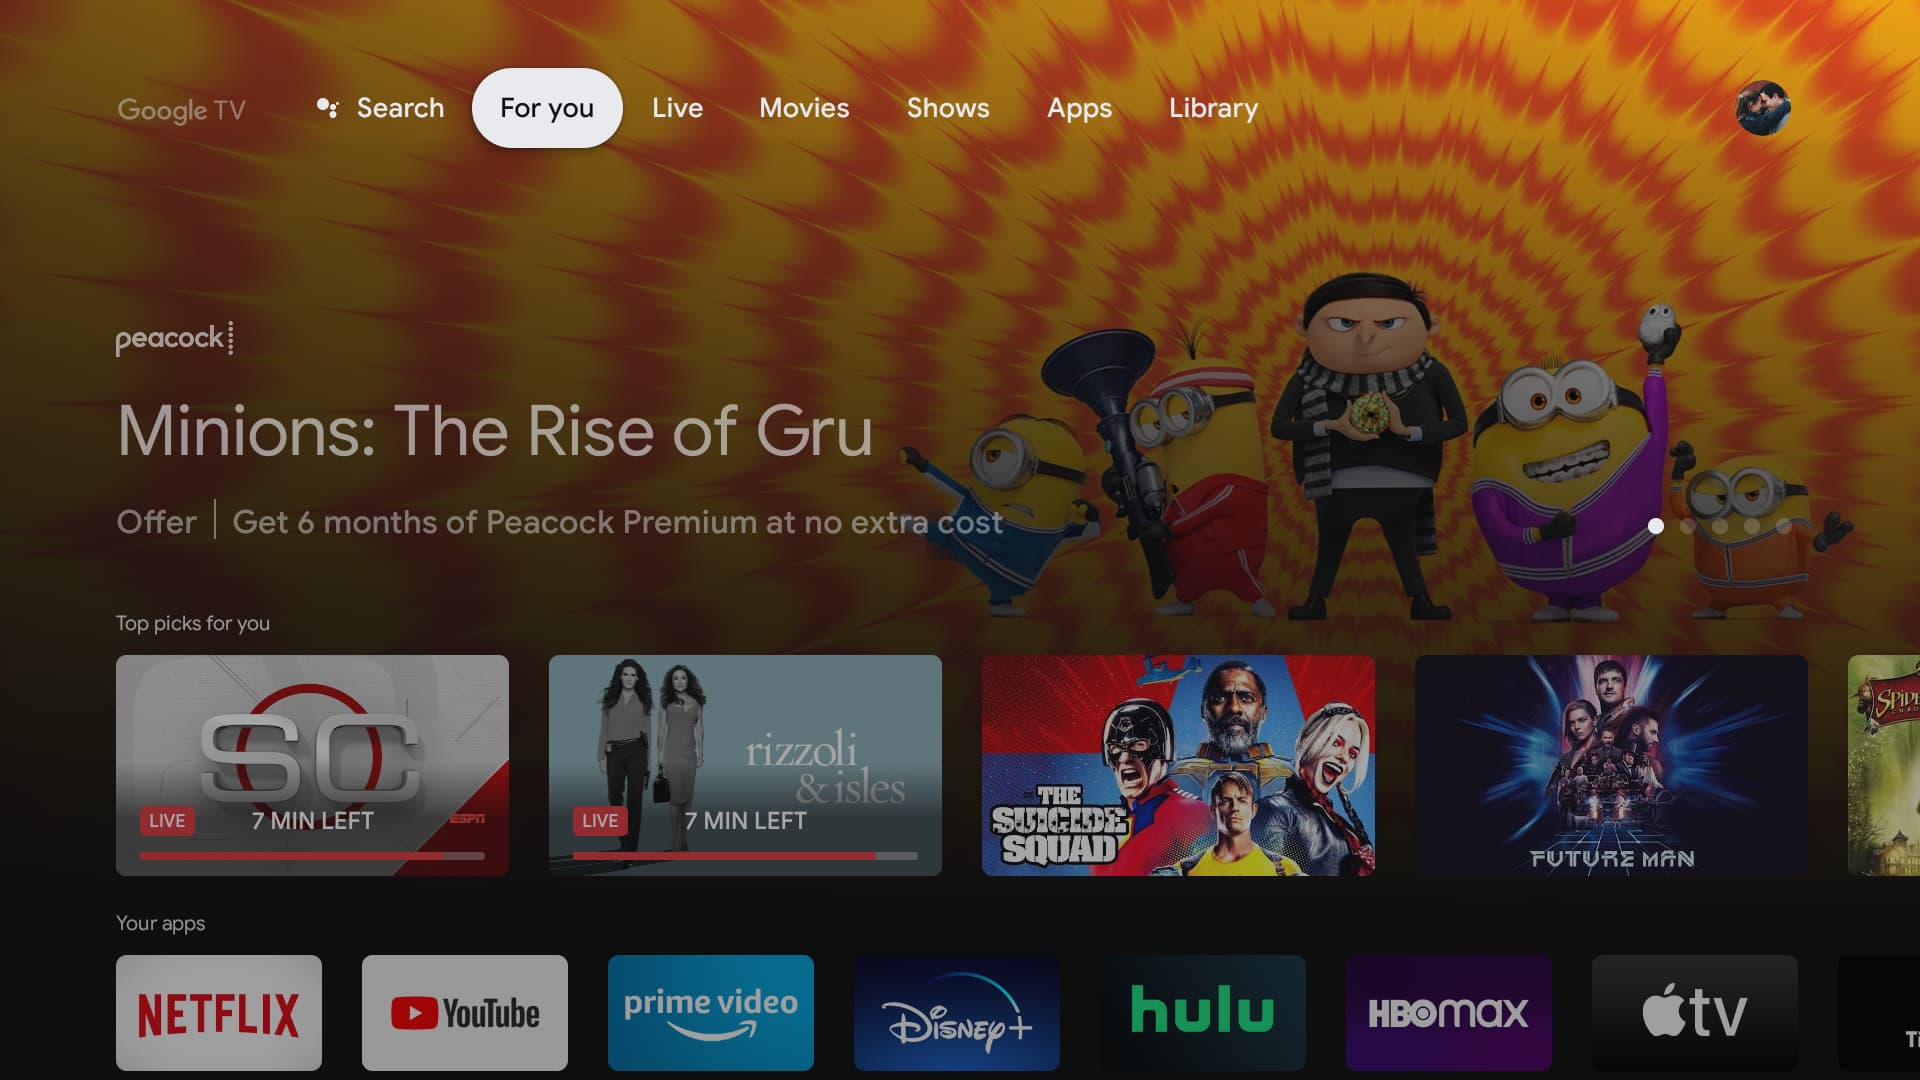 Google TV screensaver gets 'Proactive Personalized Results' - 9to5Google